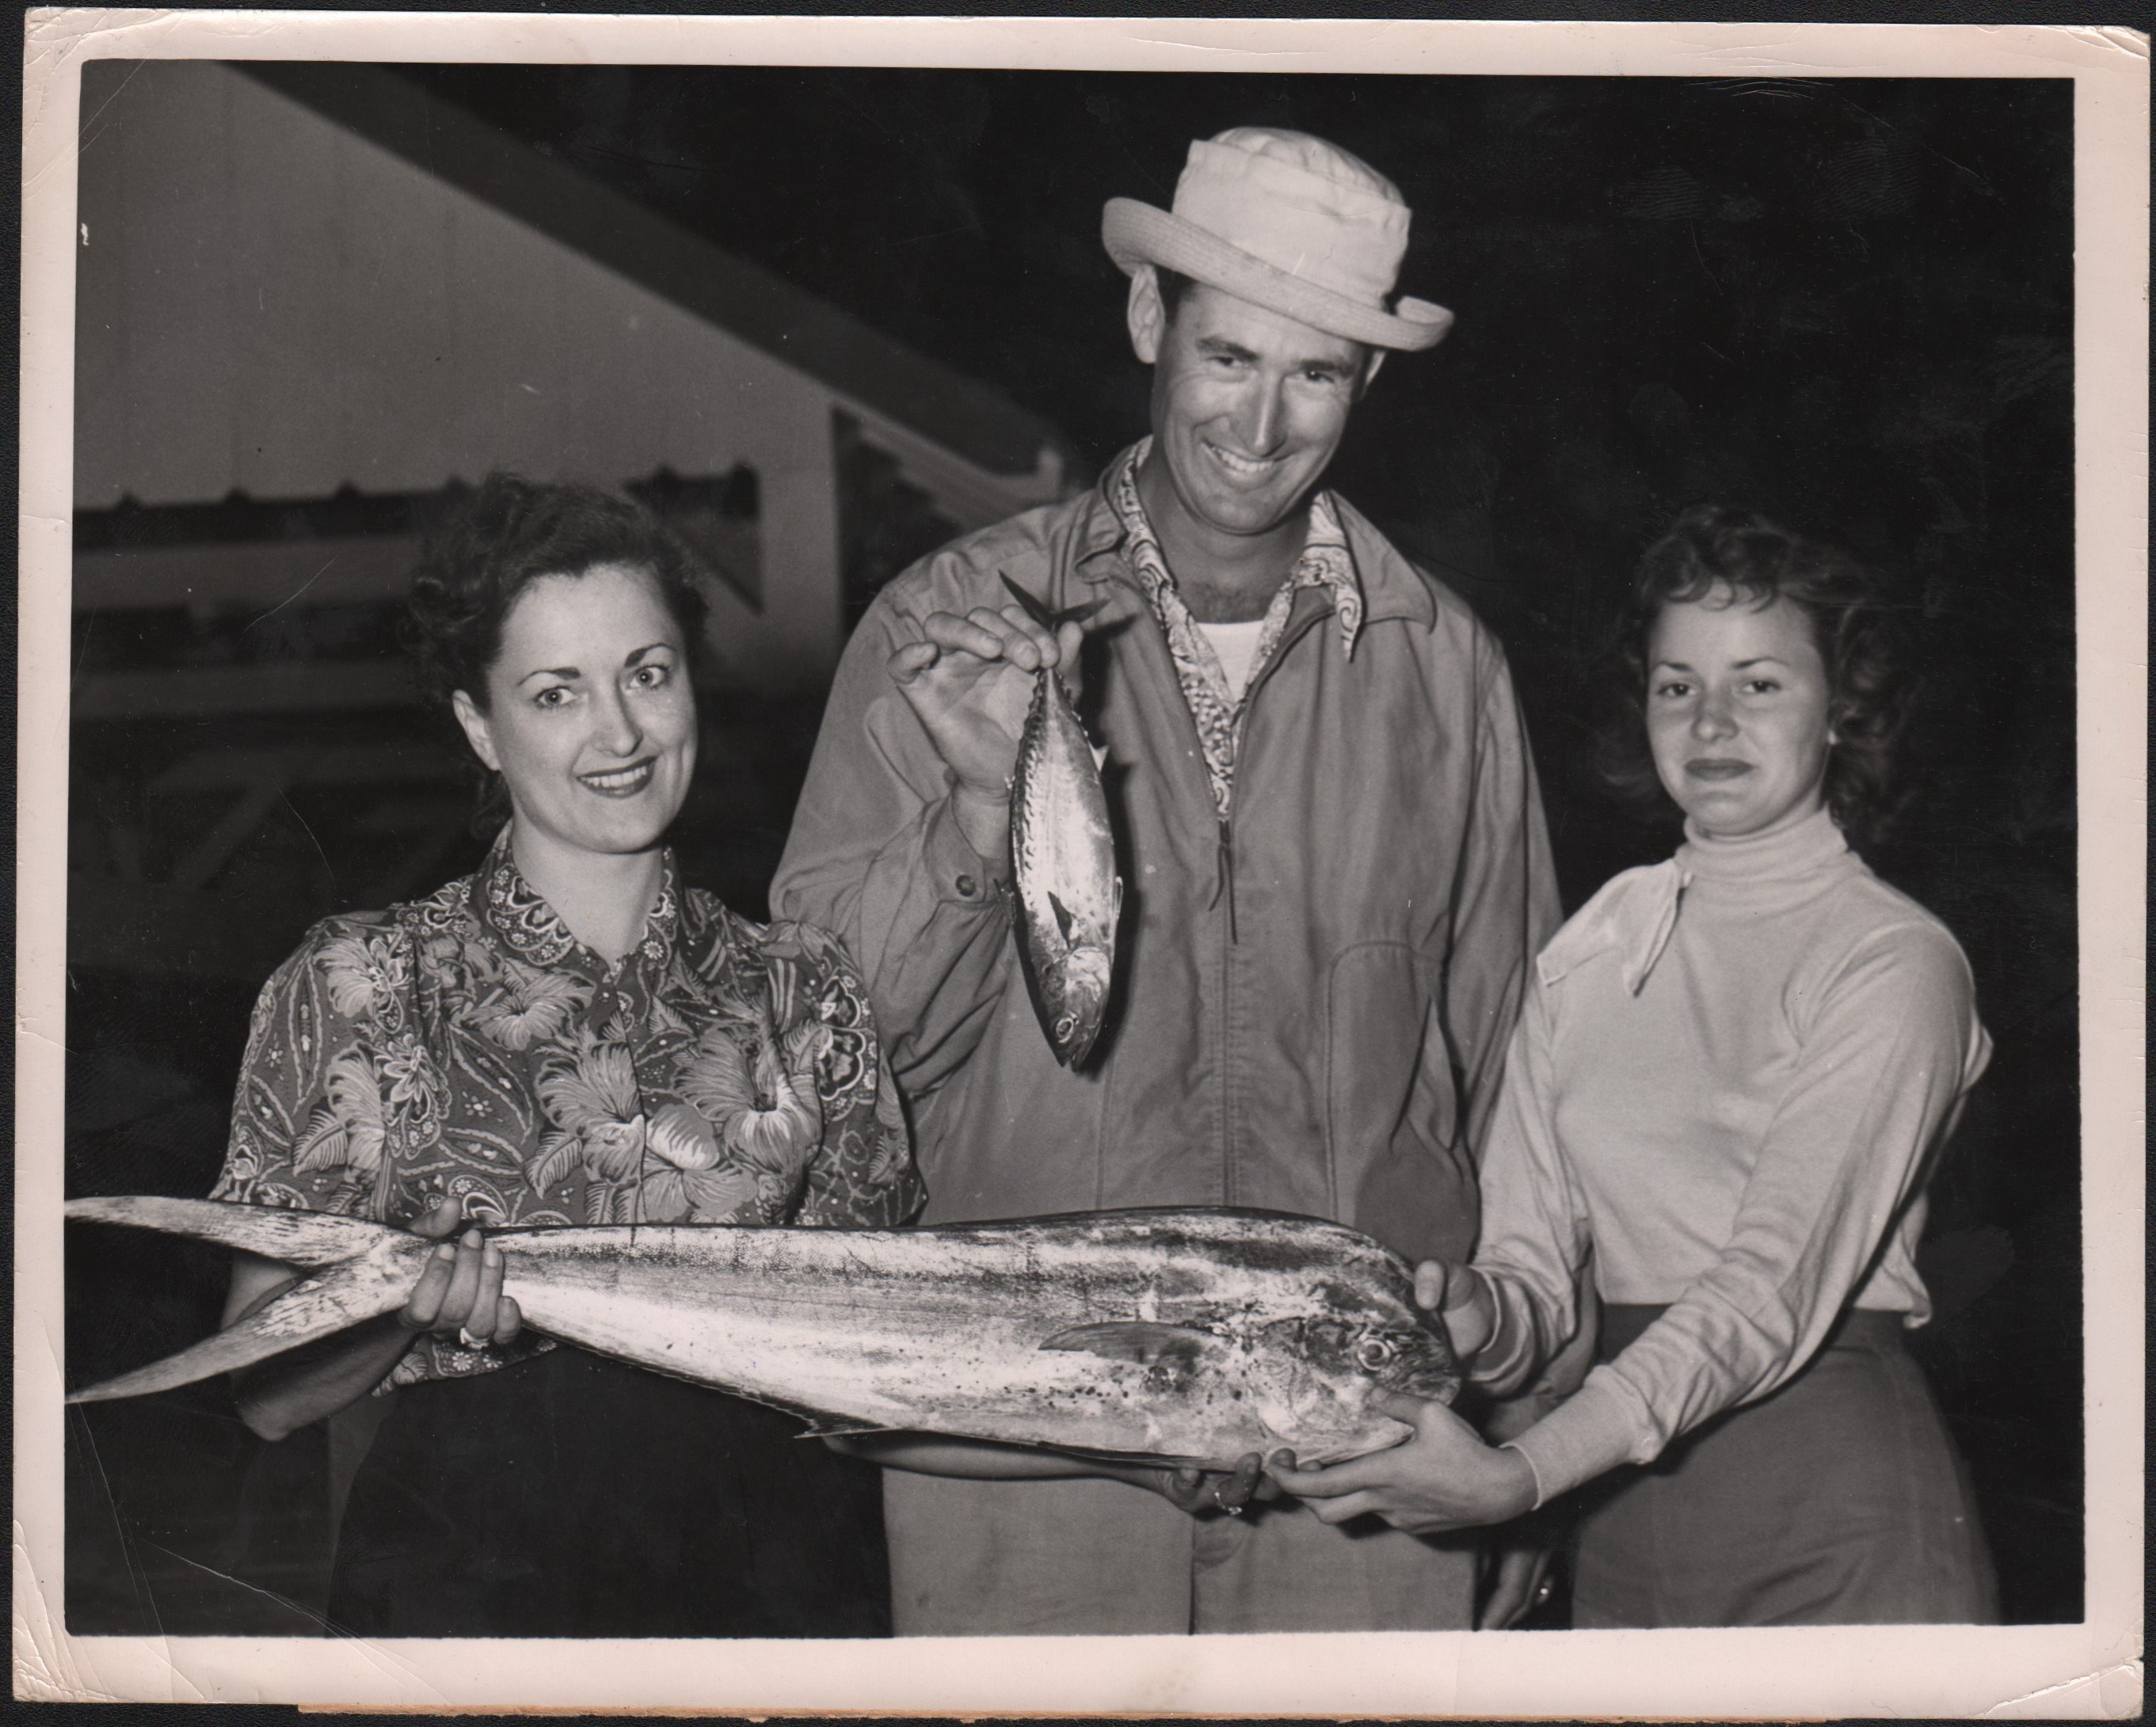 Mr. & Mrs. Ted Williams Fishing Tournament Photograph